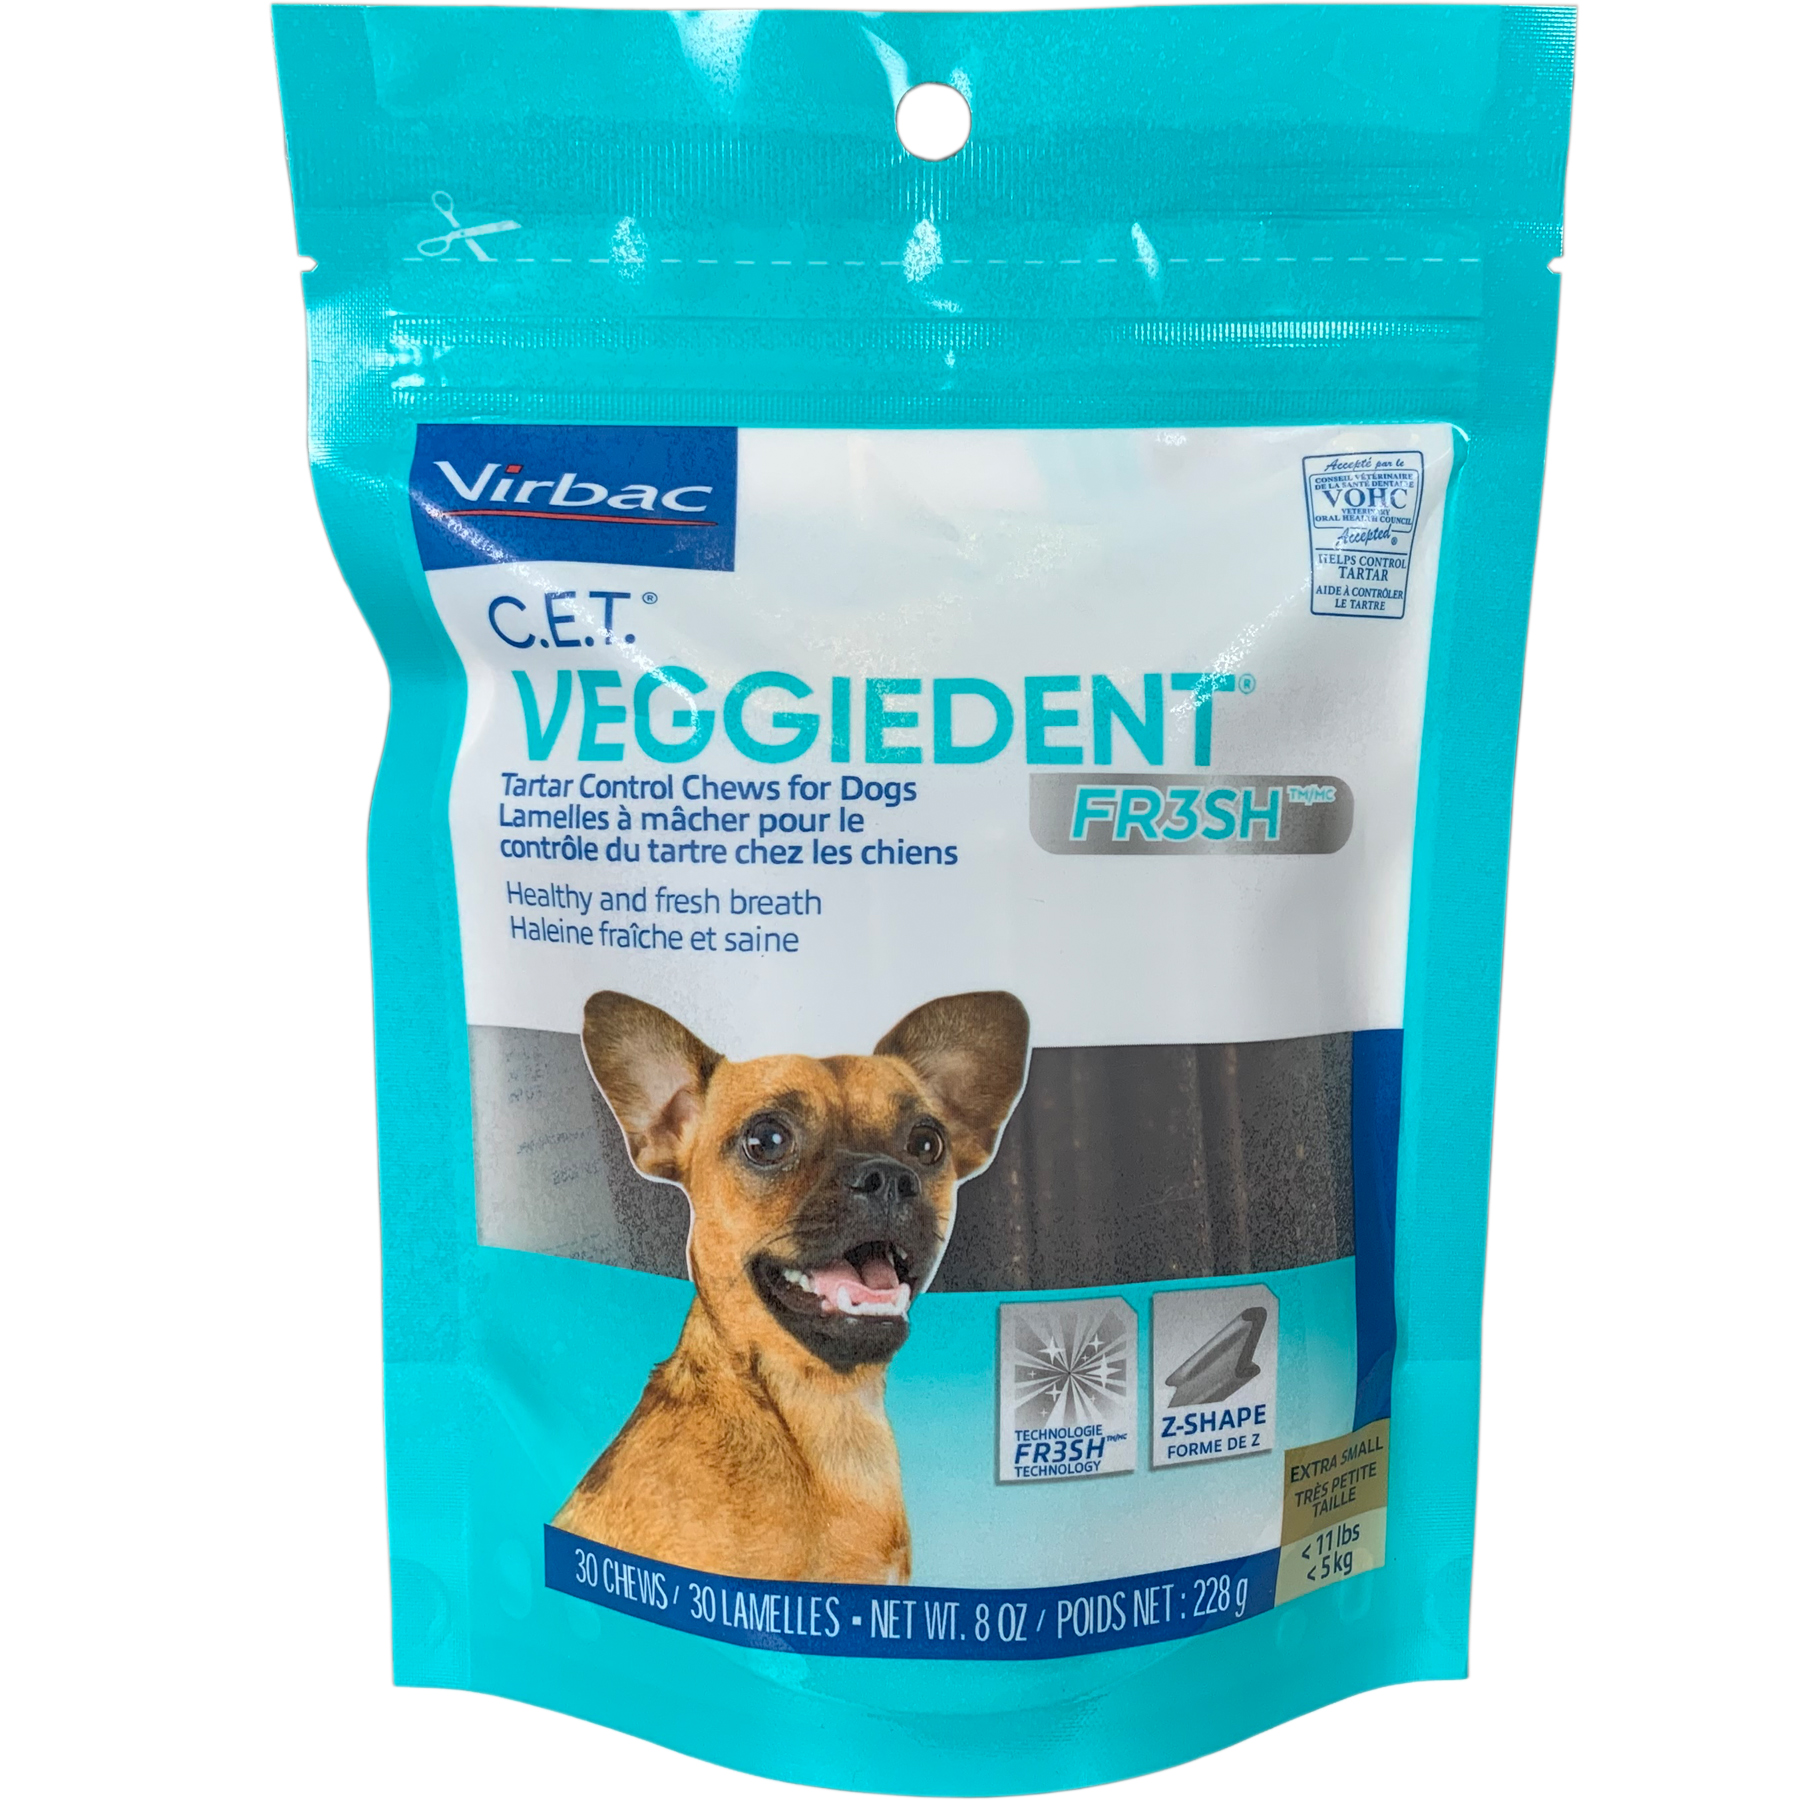 C.E.T. VeggieDent FR3SH Chews for Dogs Usage